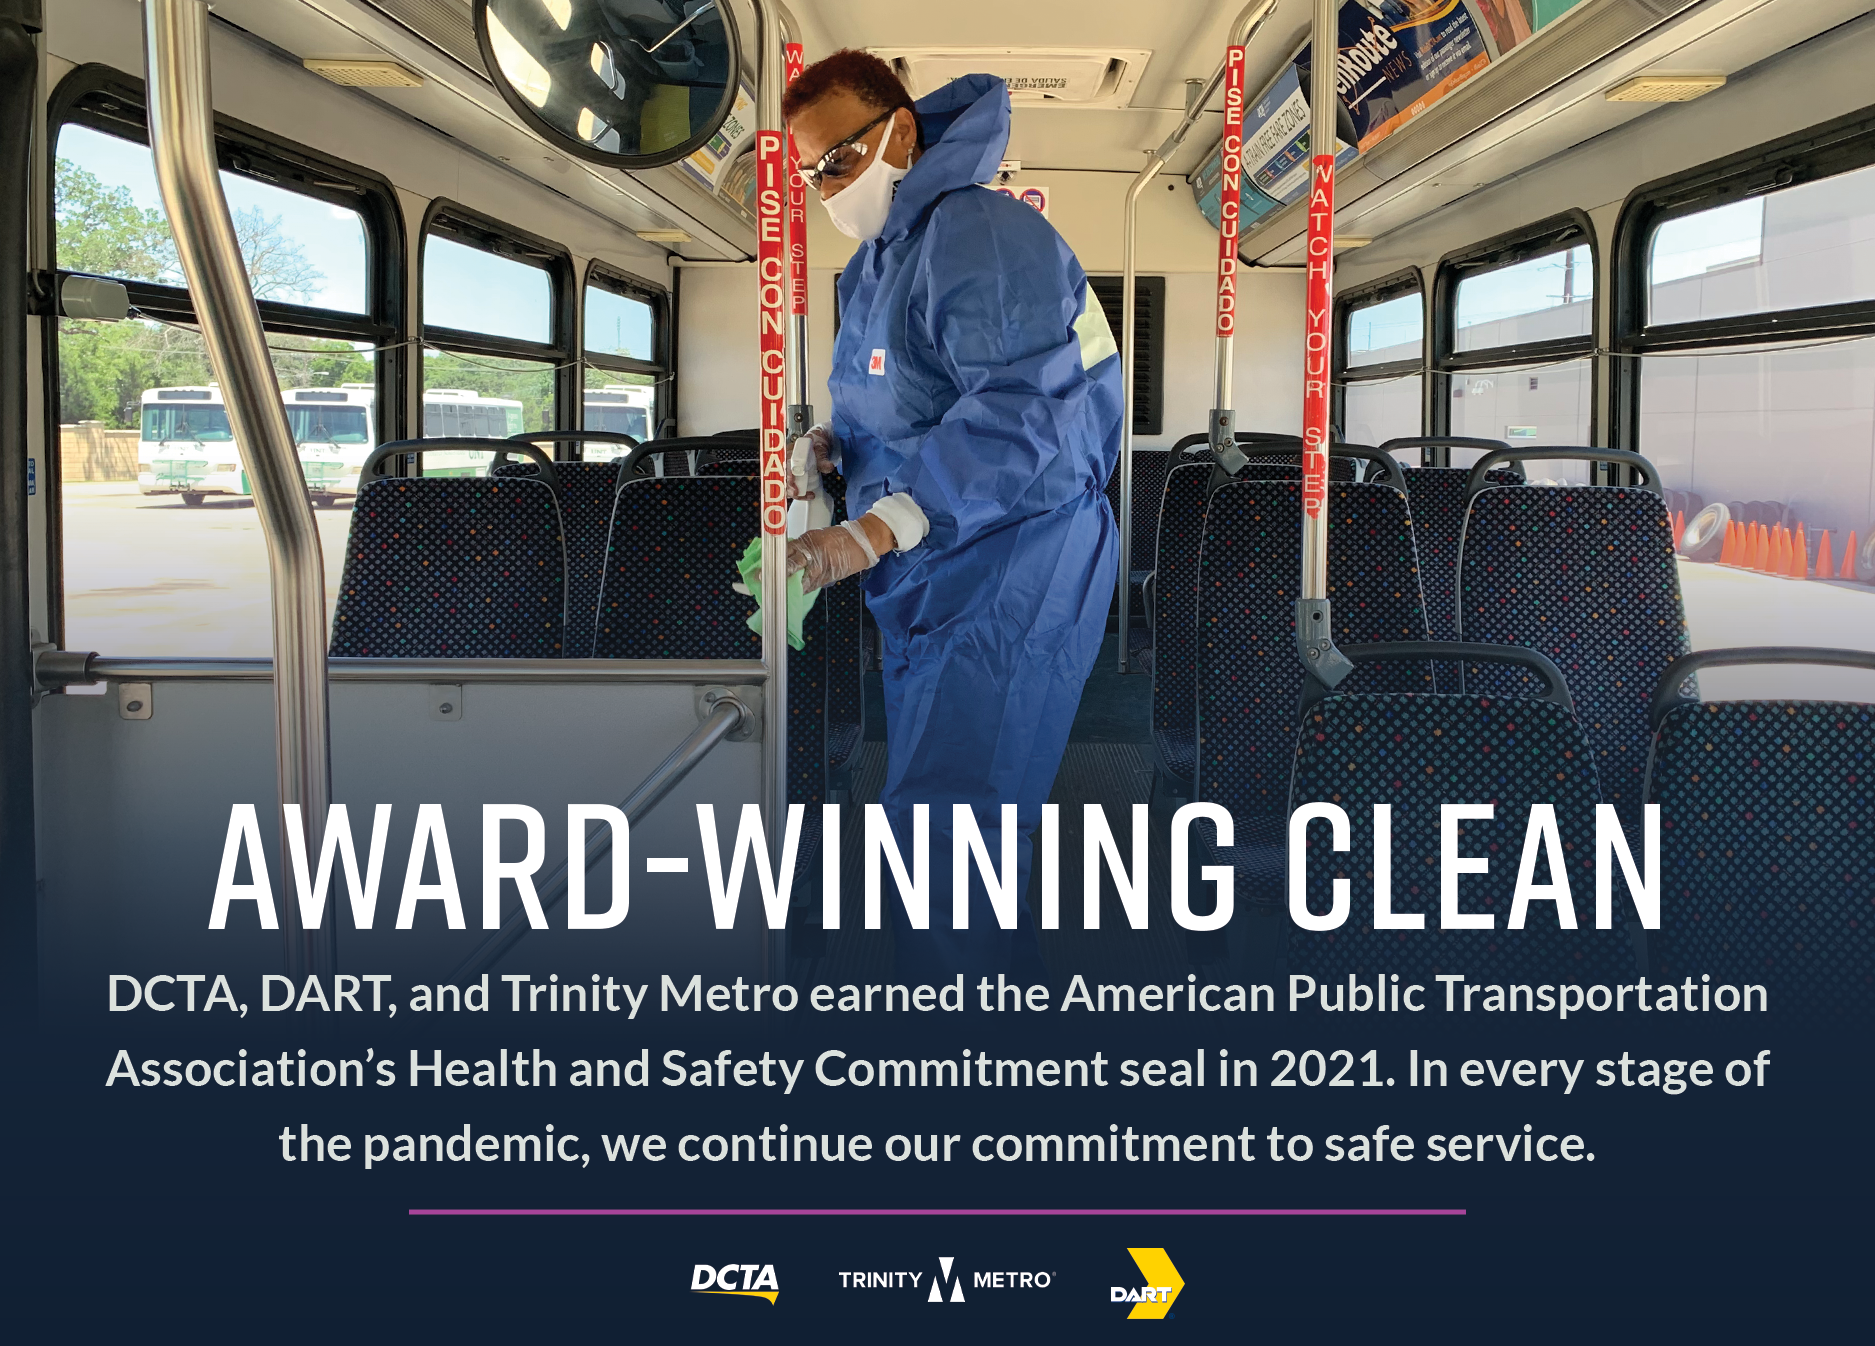 Man cleaning bus in a safety suit "Award-Winning Clean"